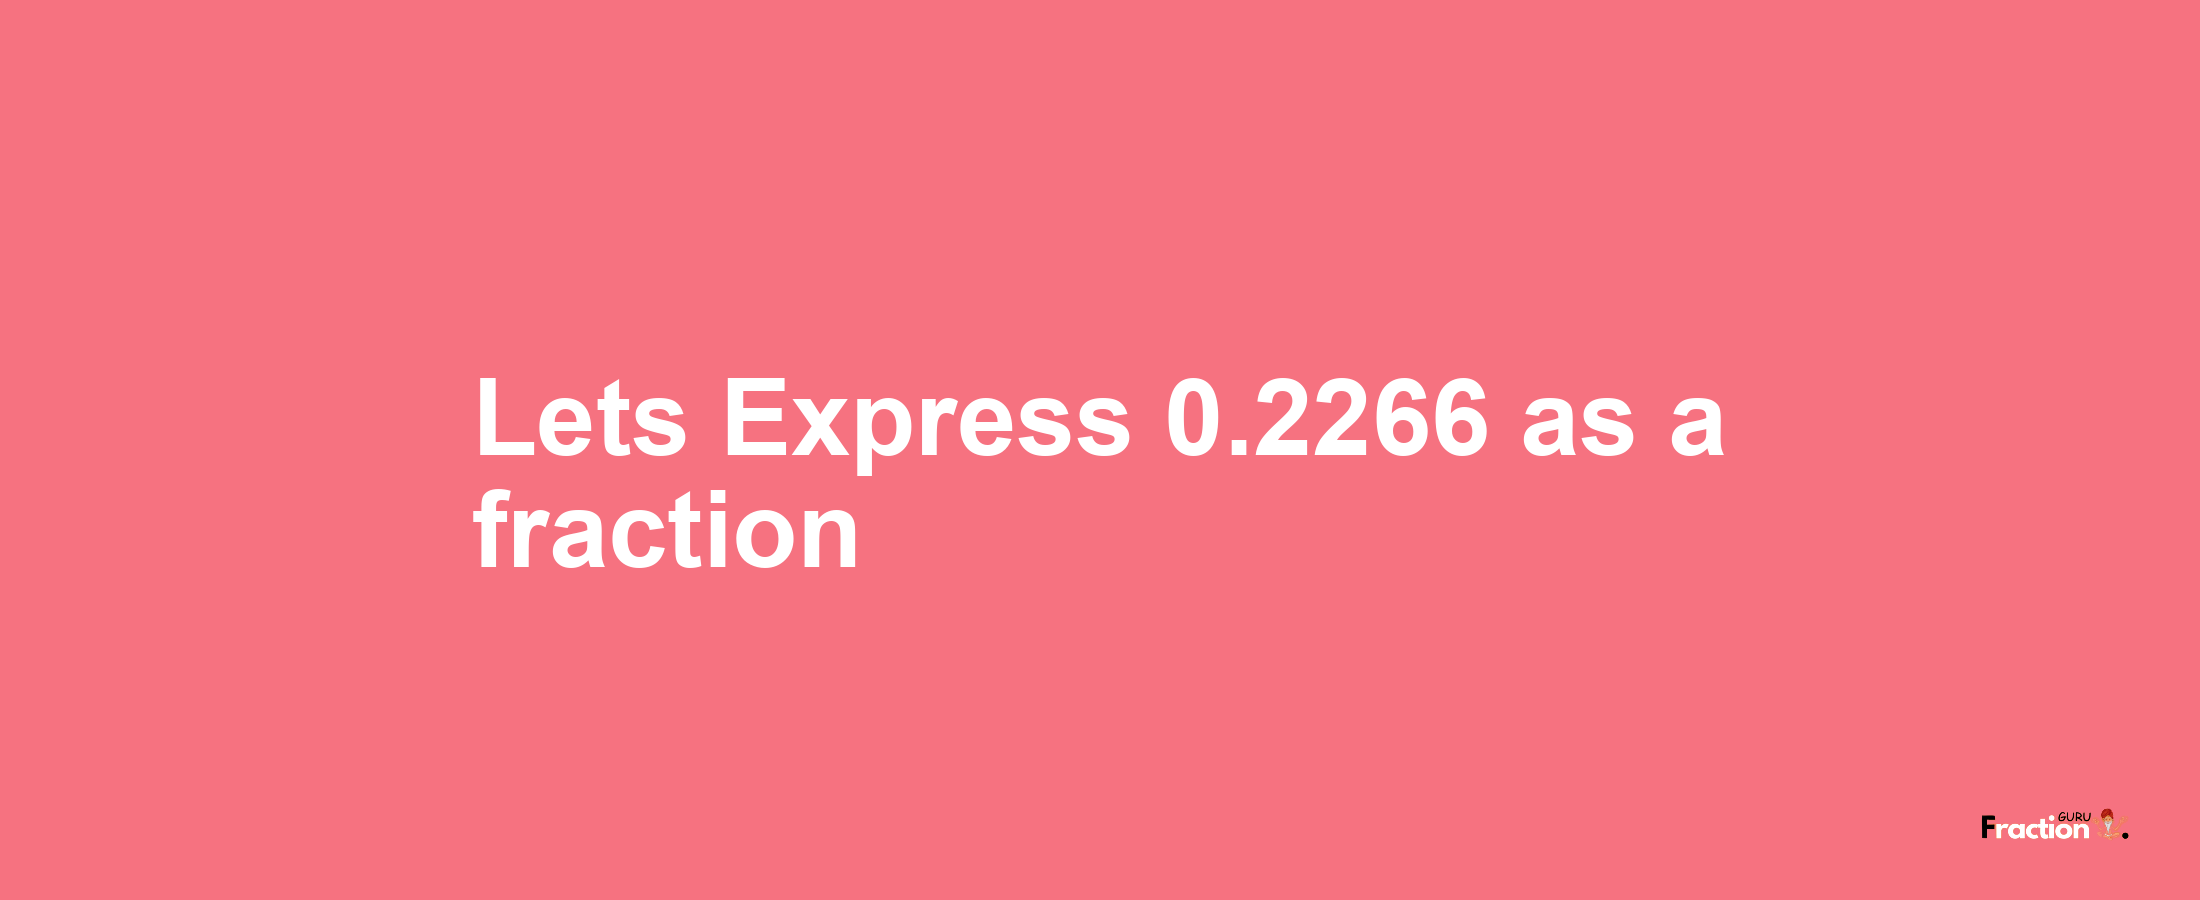 Lets Express 0.2266 as afraction